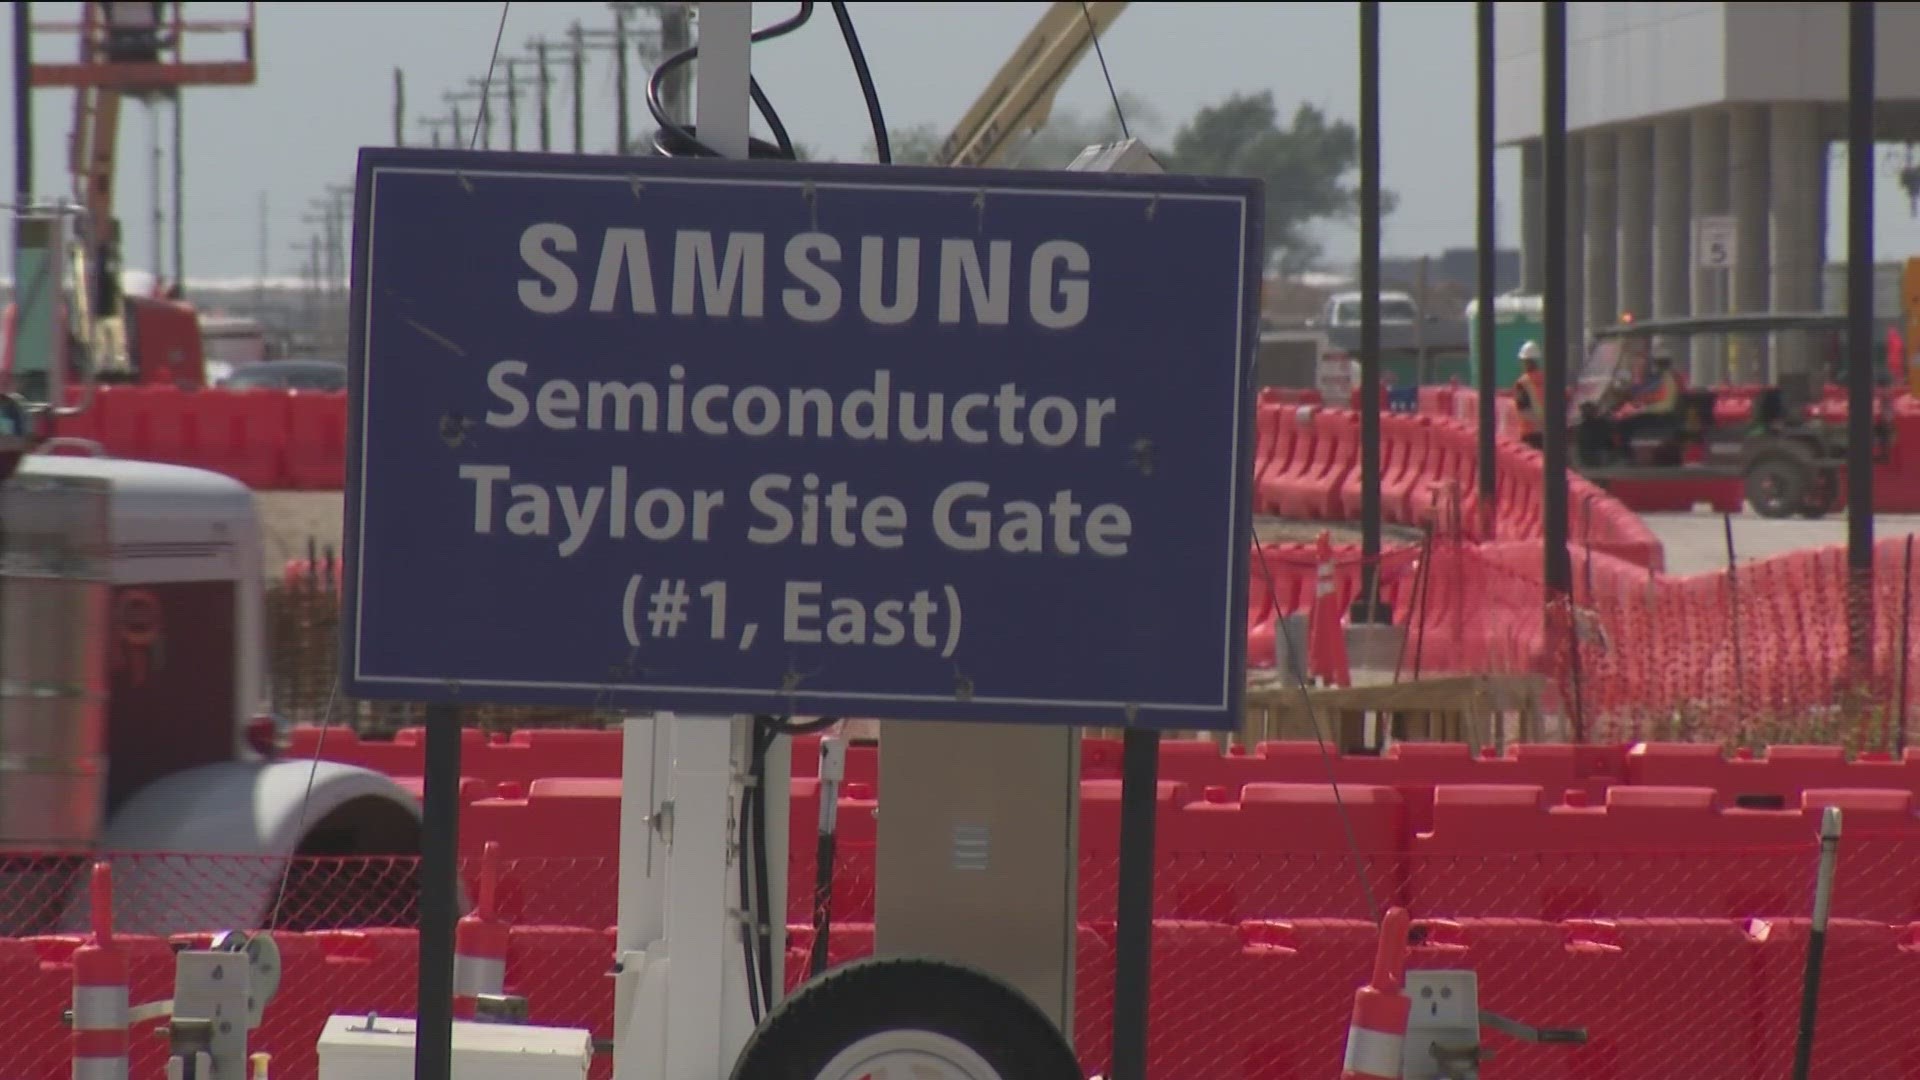 The incident happened Friday afternoon at a semiconductor facility.